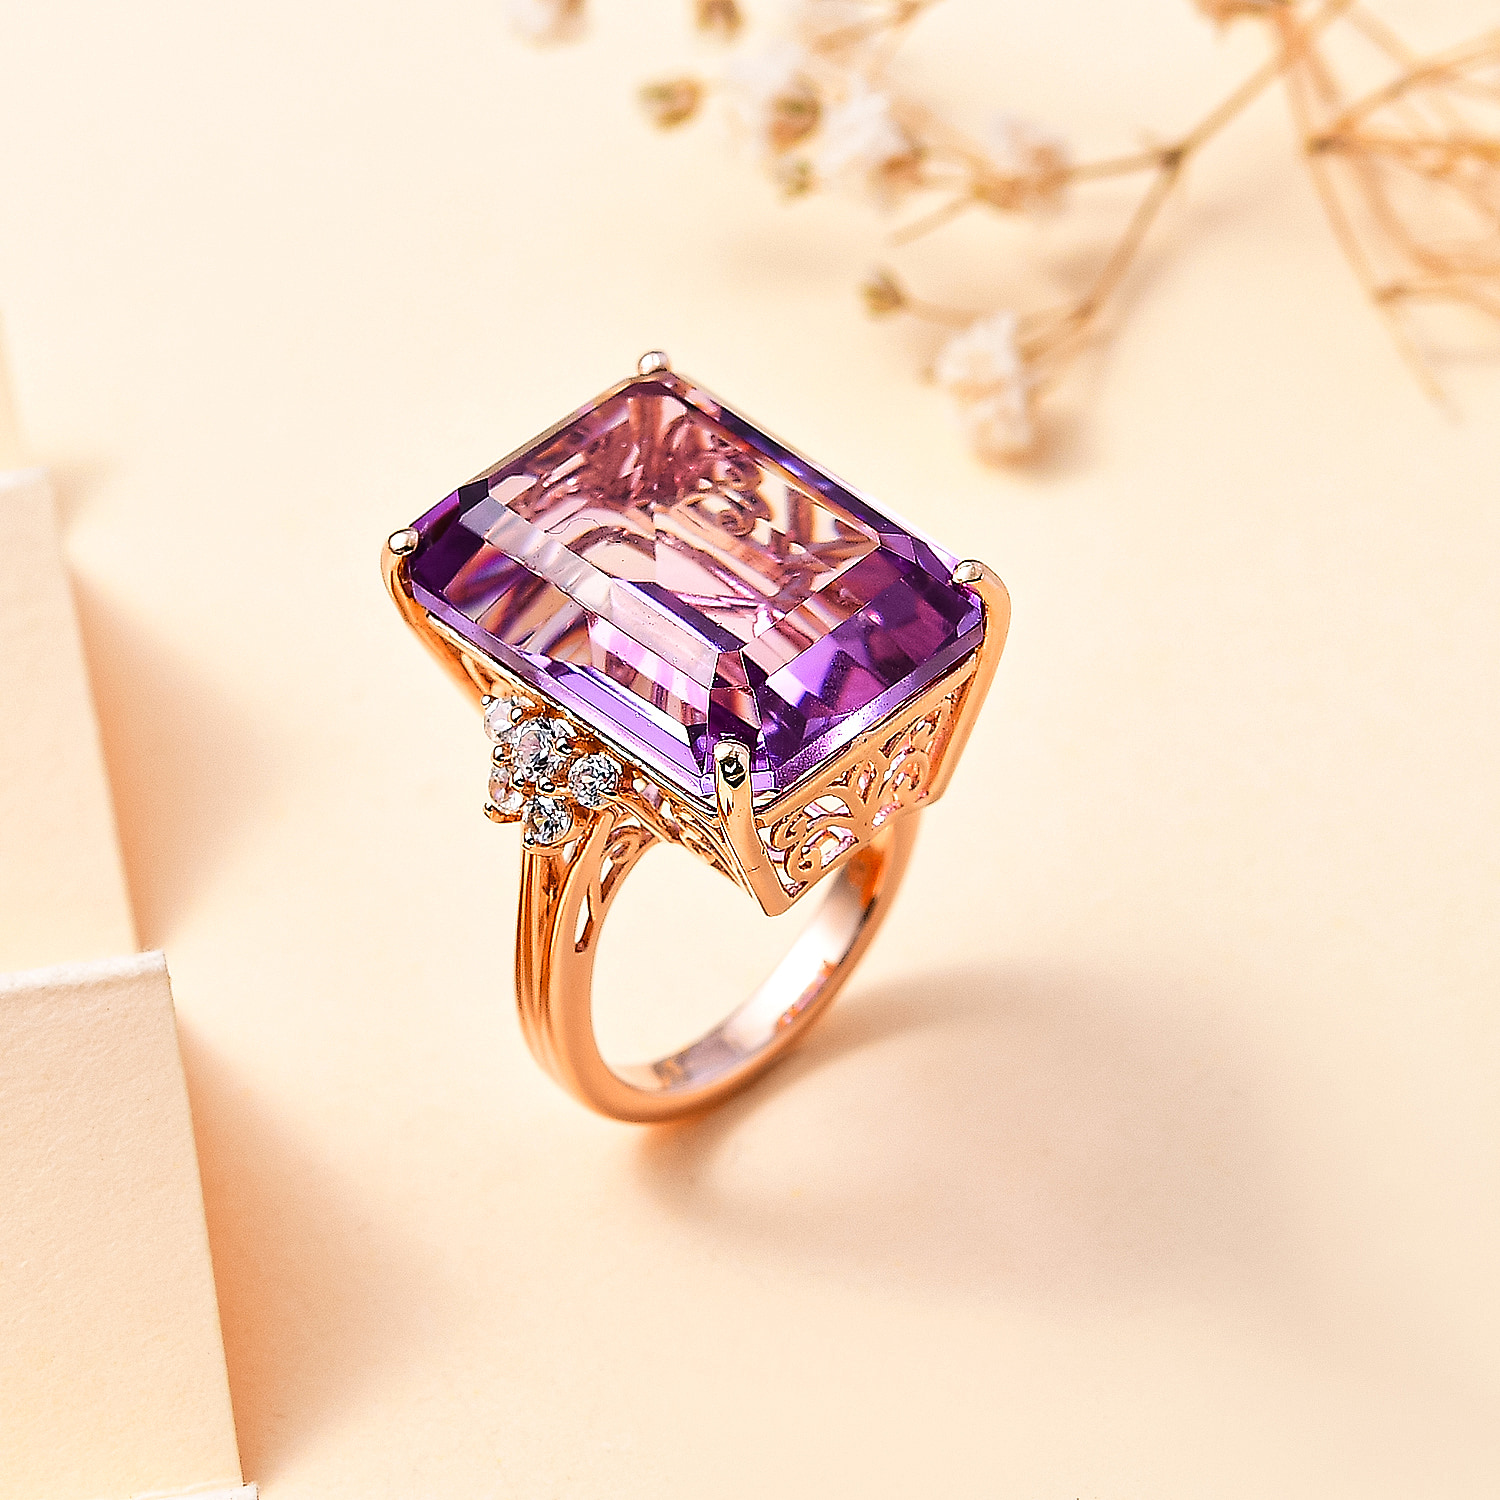 Rose De France Amethyst & Natural Zircon Ring in 18K RG Vermeil Plated Sterling Silver 24.37 Ct,  Silver Wt.5.72 Gms